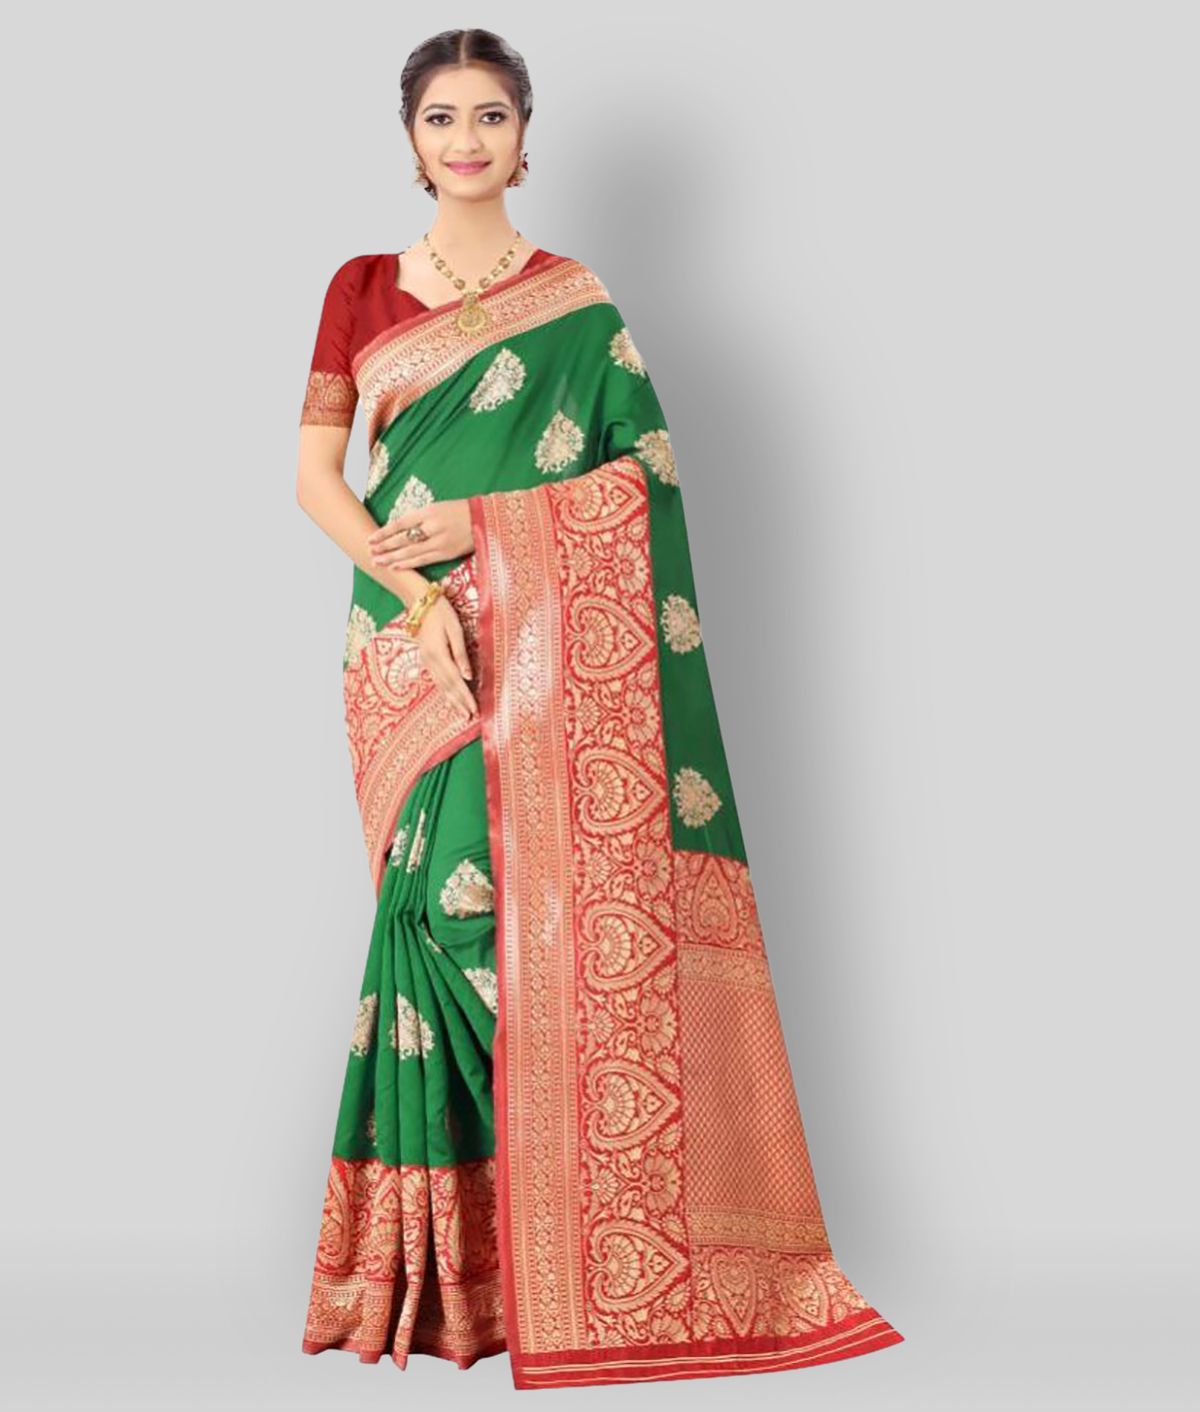     			NENCY FASHION - Multicolor Banarasi Silk Saree With Blouse Piece (Pack of 1)